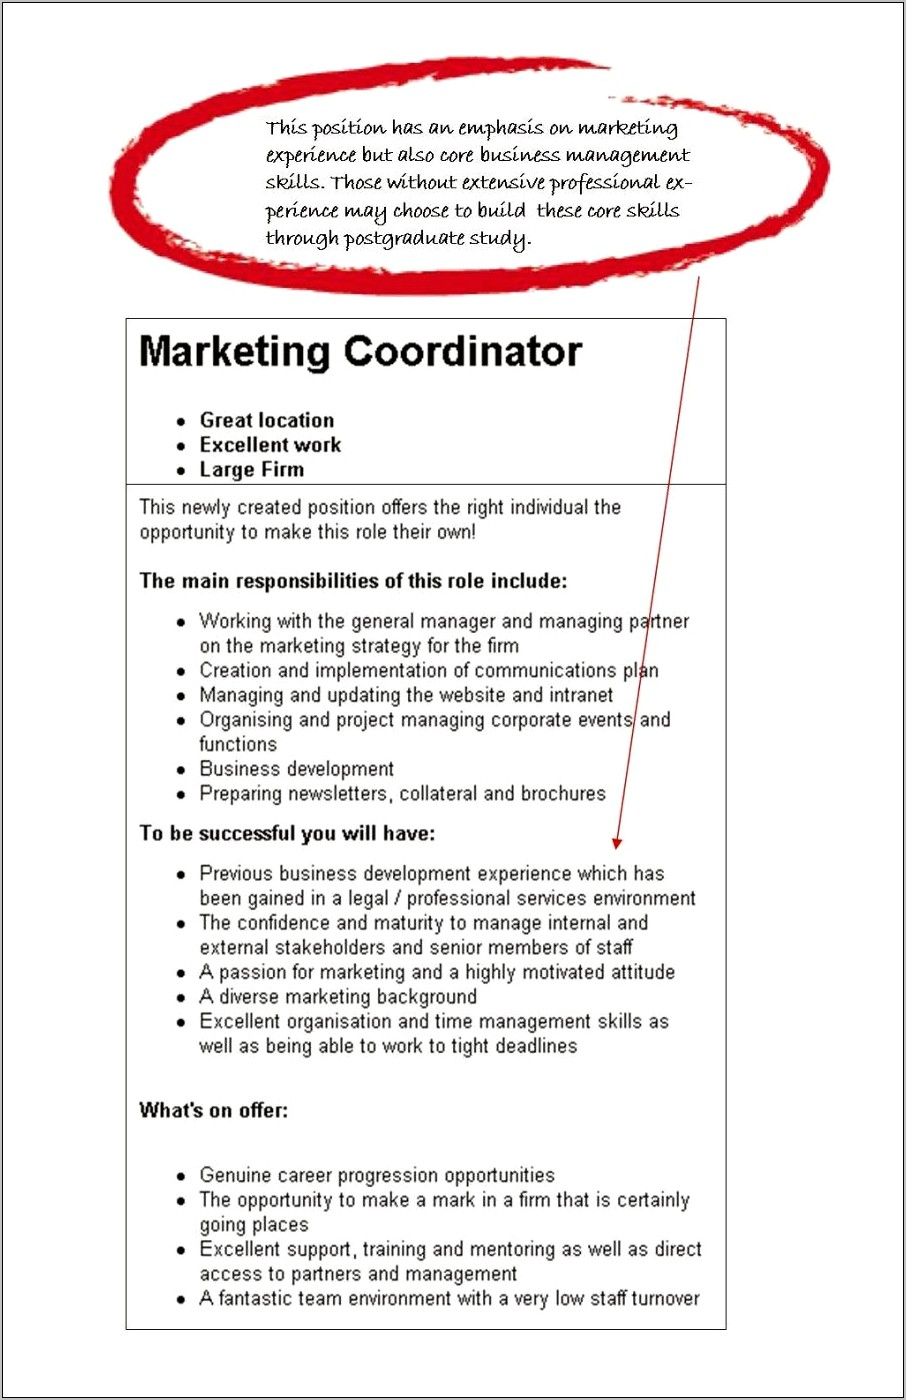 Resume Objective Statement For Marketing Position